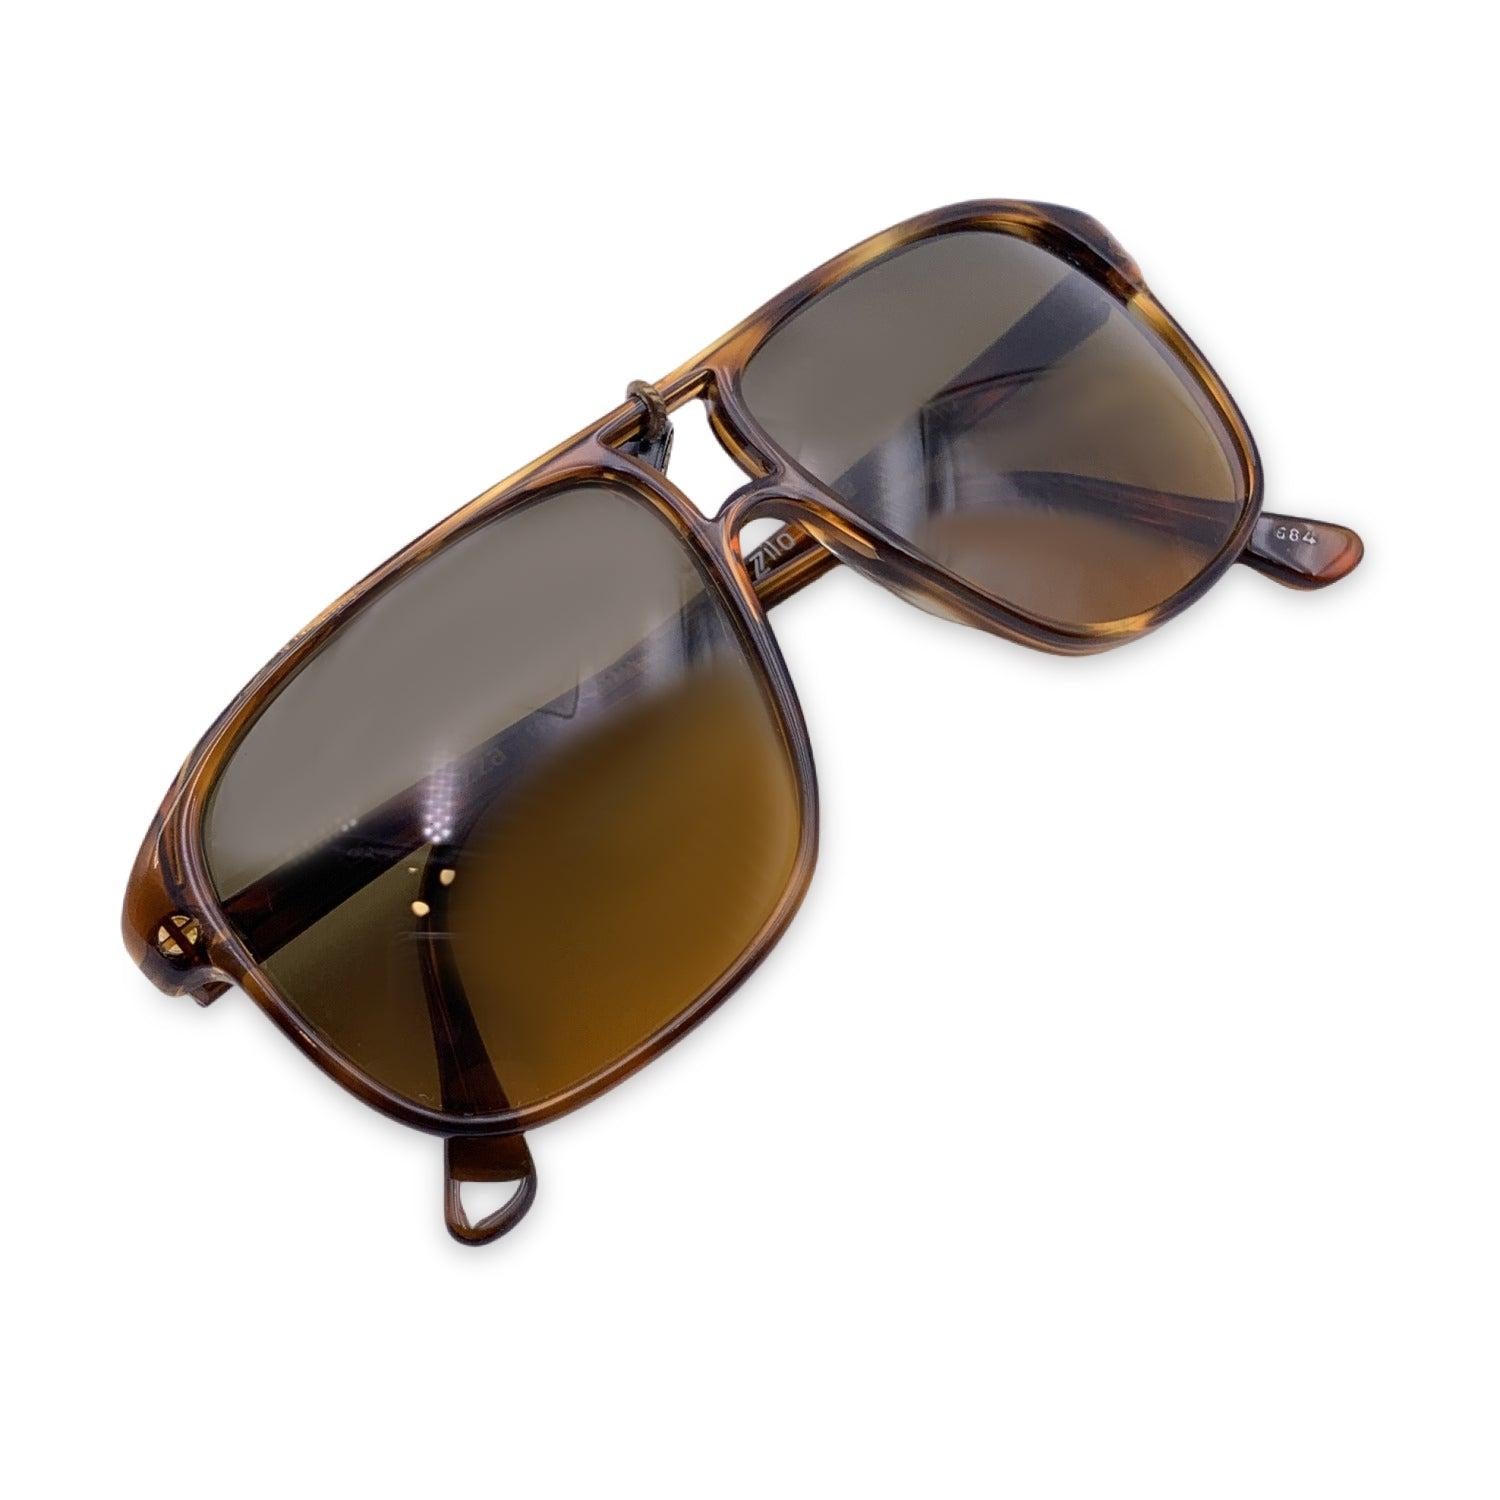 Vintage Lozza Unisex Brown Sunglasses Zilo N/42 54/12 135mm. Brown acetate aviator squared frame. 100% Total UVA/UVB protection. Duo color green to yellow gradient lenses. Made in Italy. Details MATERIAL: Plastic COLOR: Brown MODEL: Zilo GENDER: